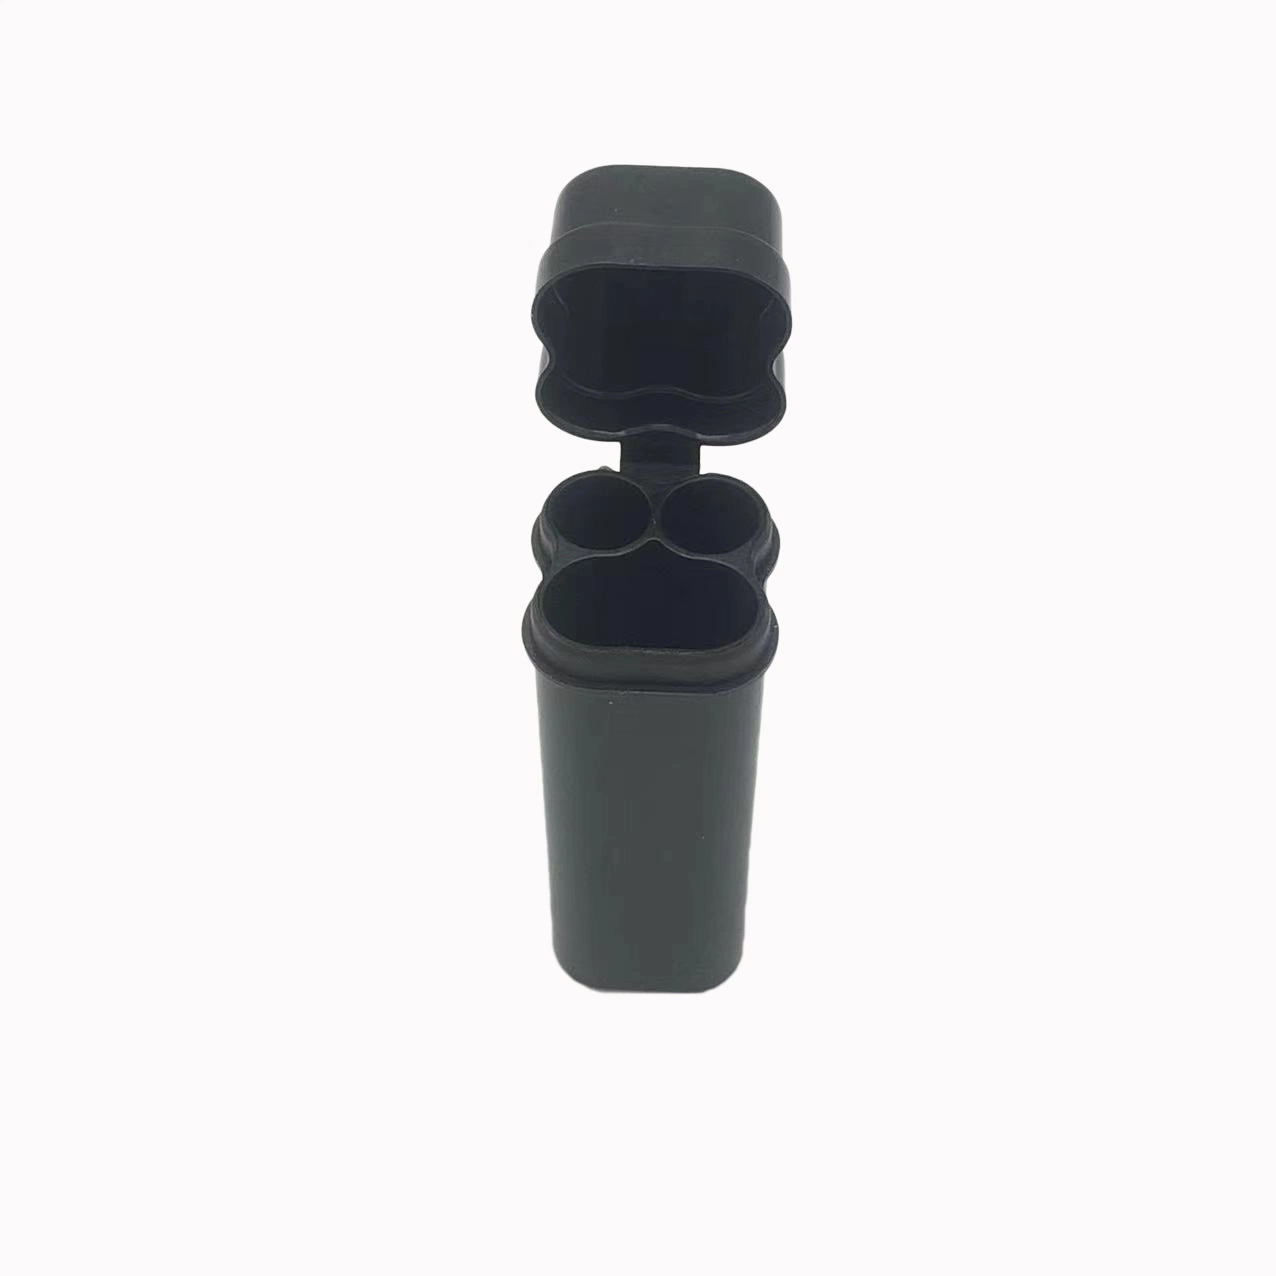 New Arrived Plastic Joint Holder 3 Pack Double Containers for Joint Custom Blunt Tubes Holder